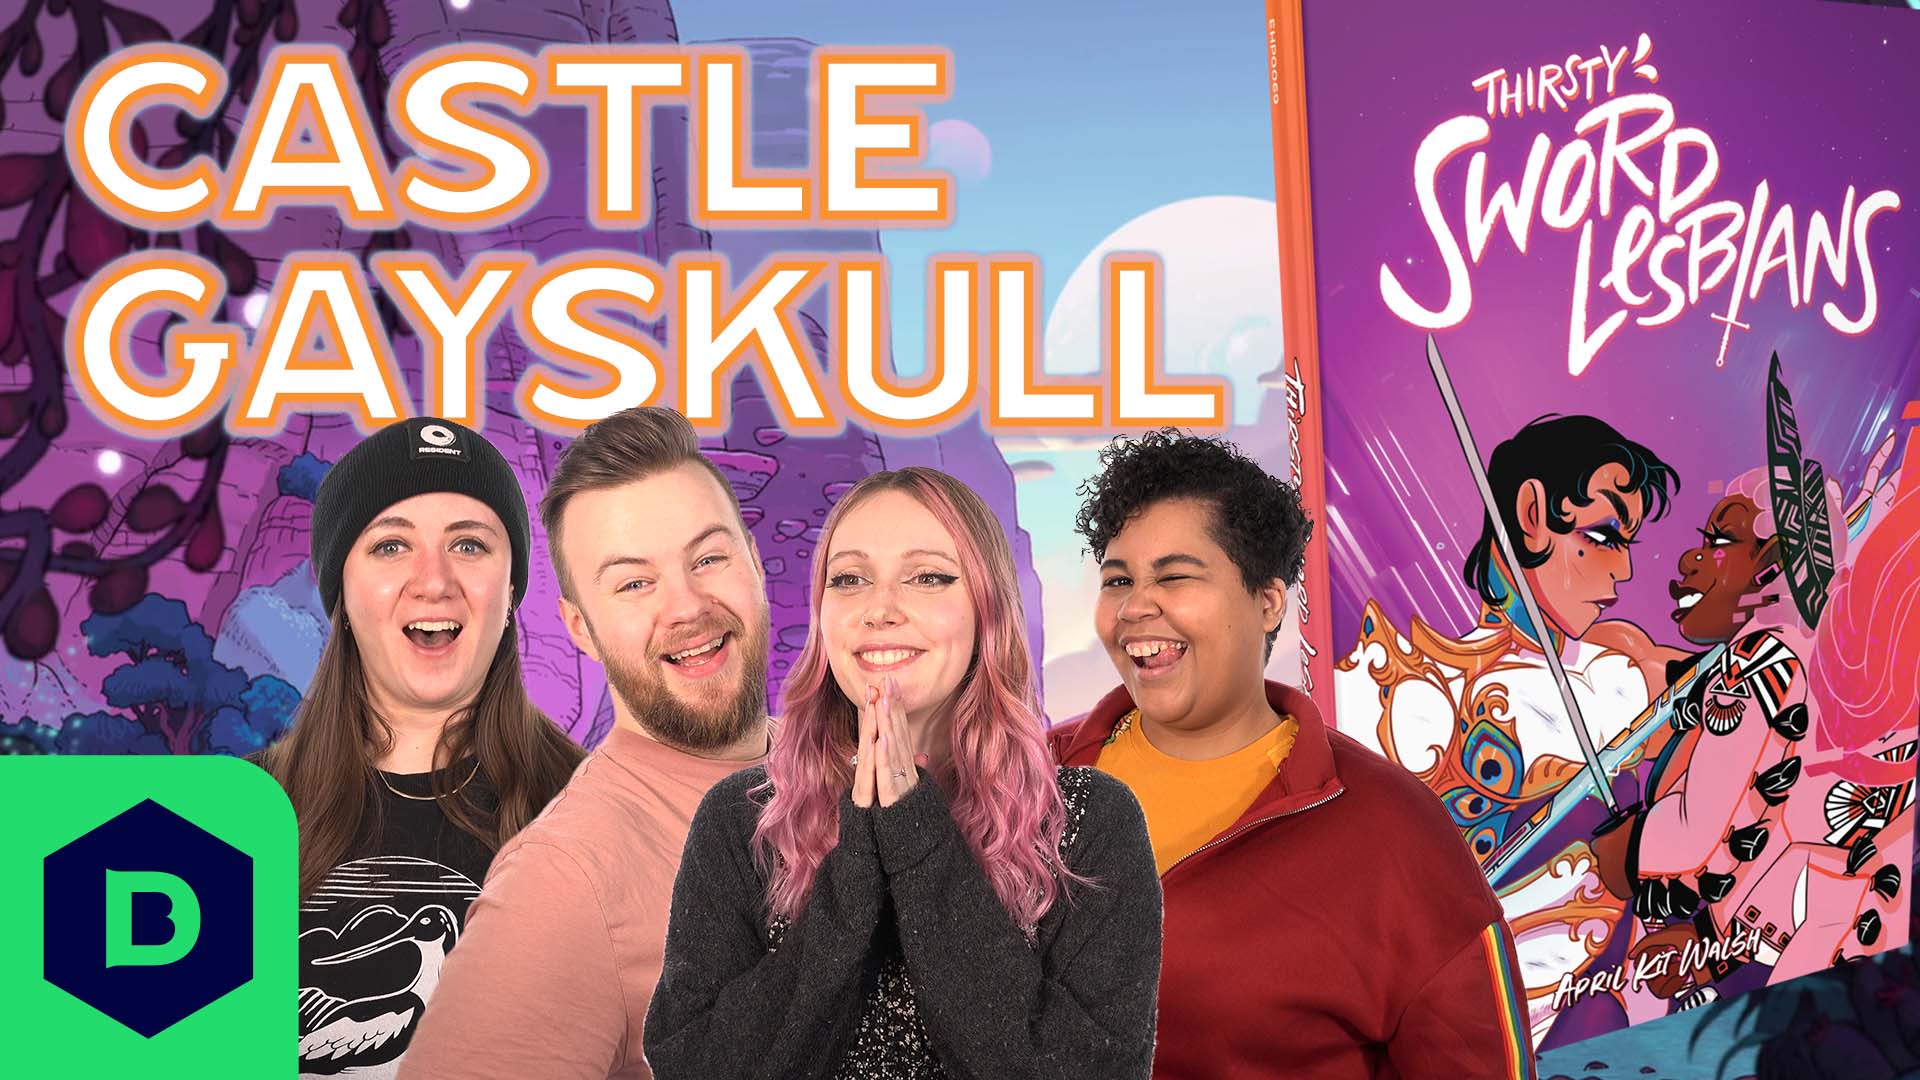 Meehan, Wheels, Maddie and Liv stand in front of colourful scenery with the words 'CASTLE GAYSKULL' above them and the Thirsty Sword Lesbians sourcebook to the right hand side.